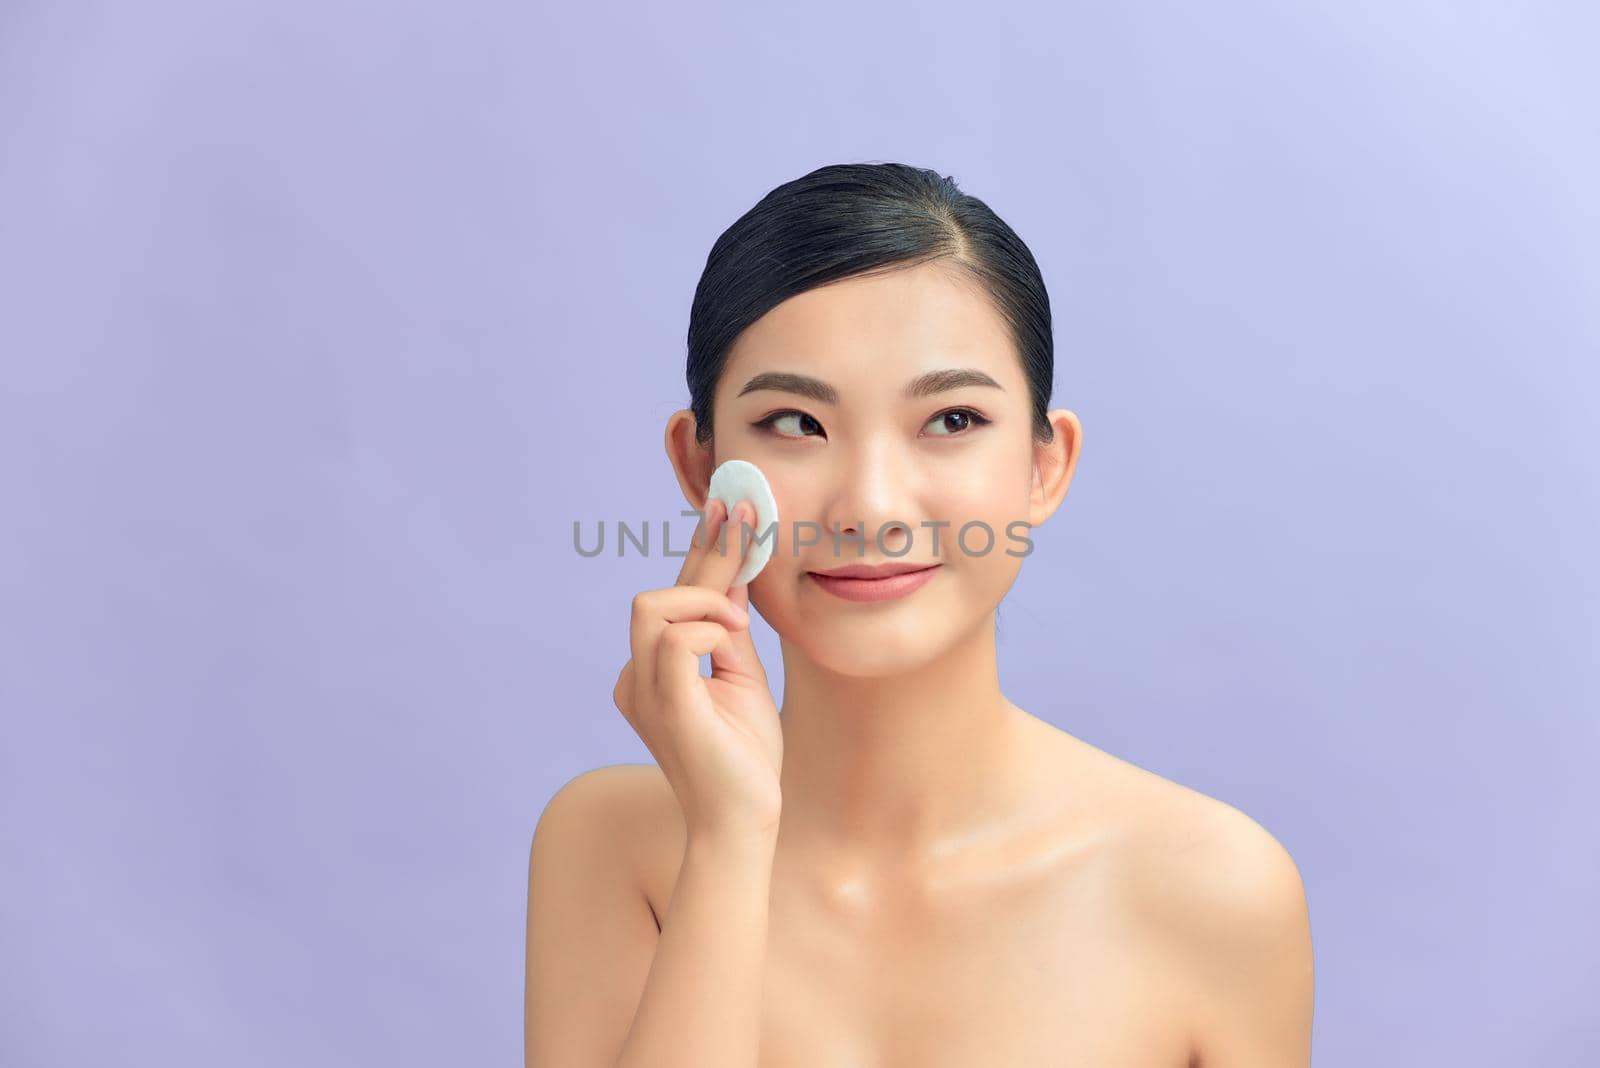 Crop attractive young female cleansing face with a cotton pad on a purple background in studio